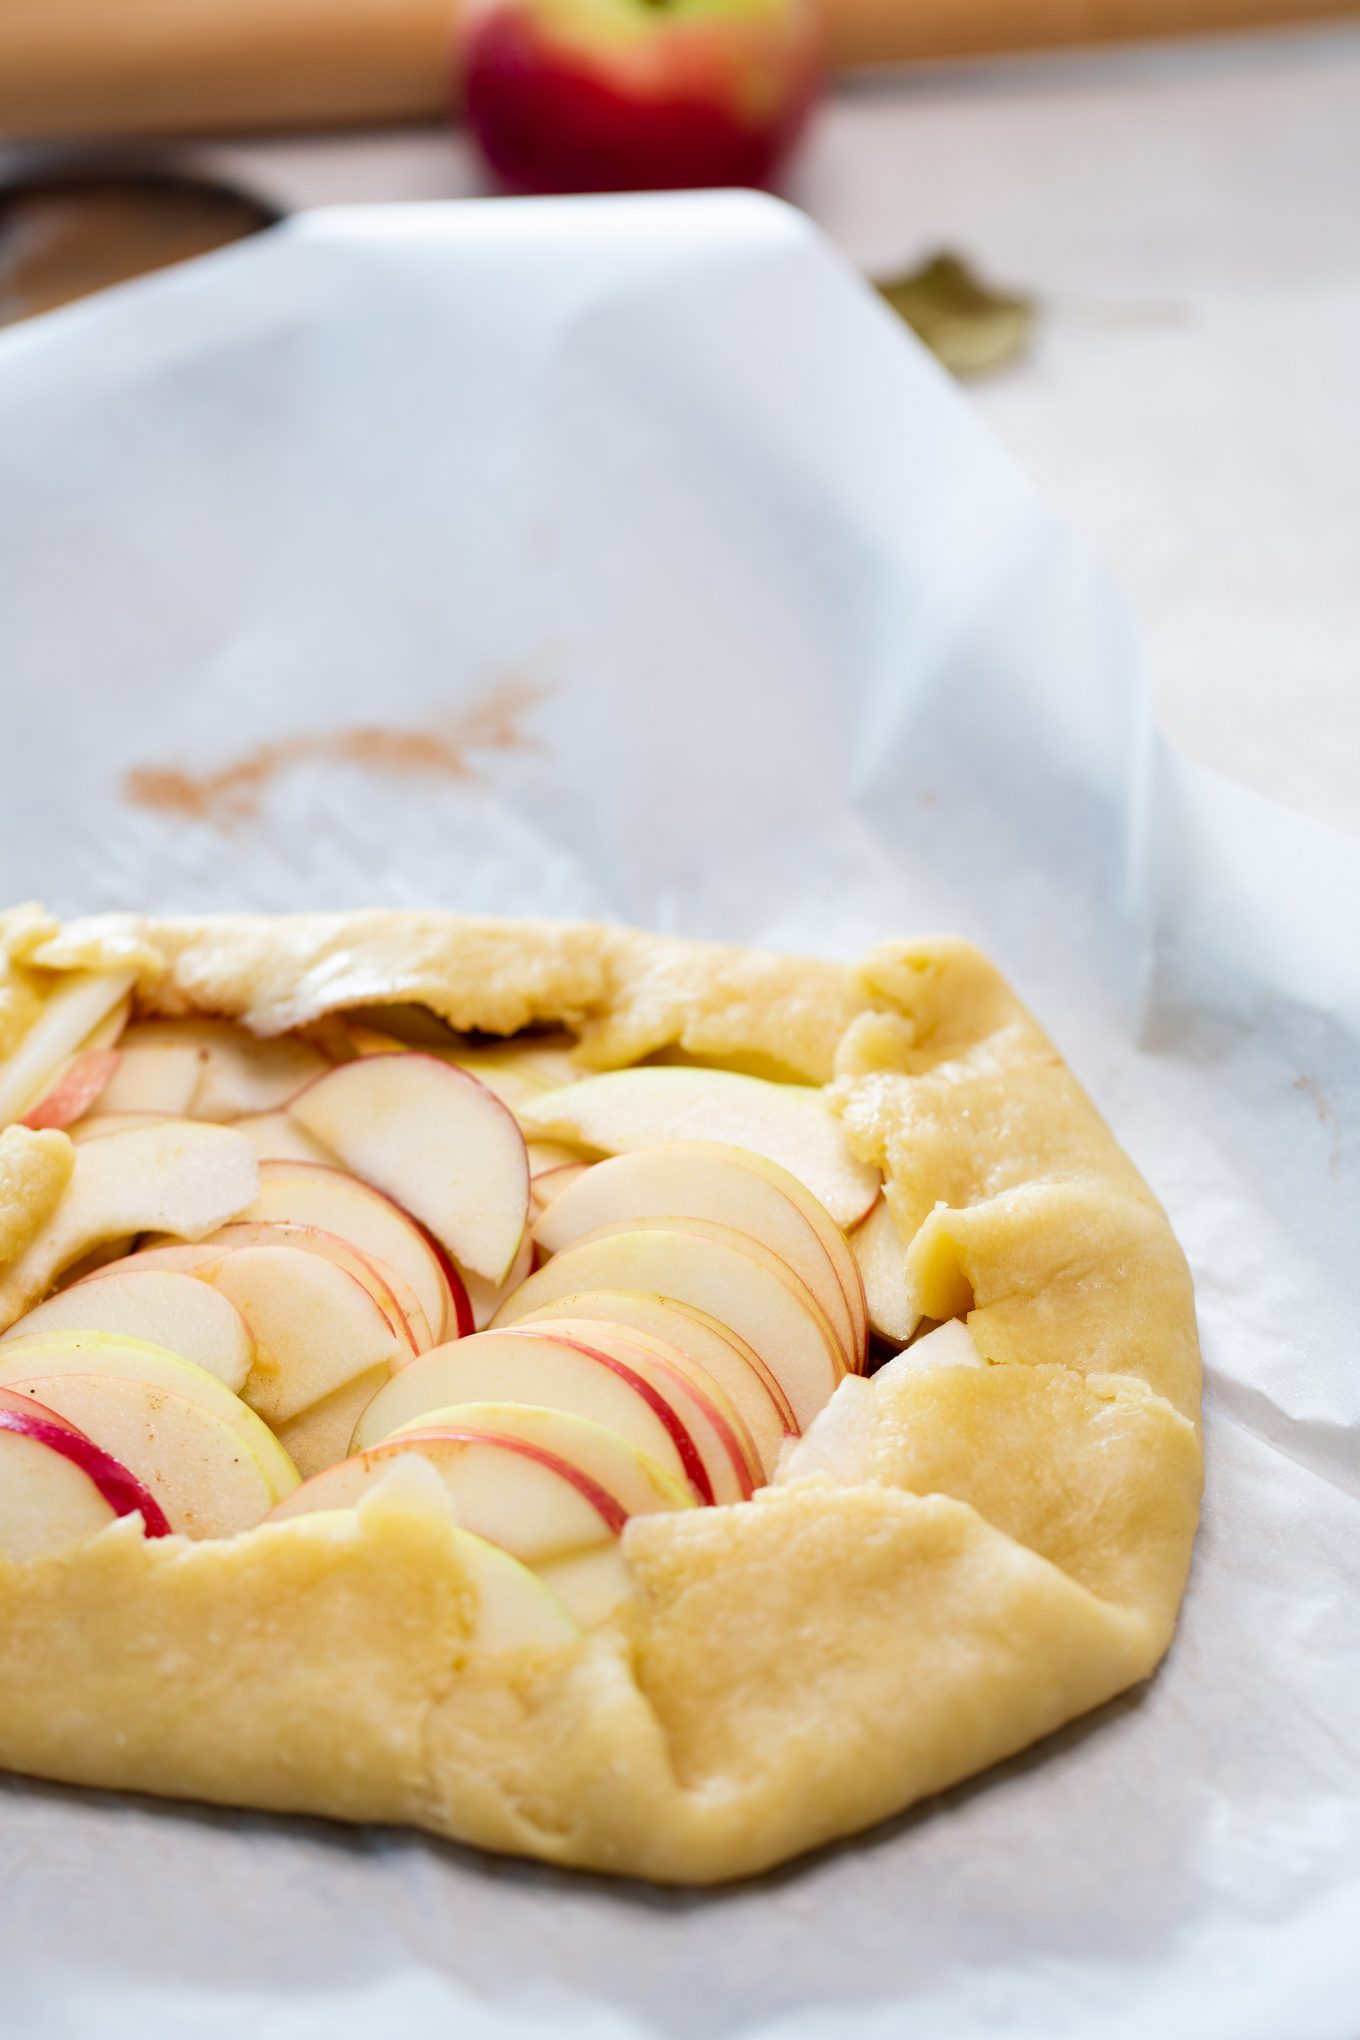 Apple galette before placing it in the oven.